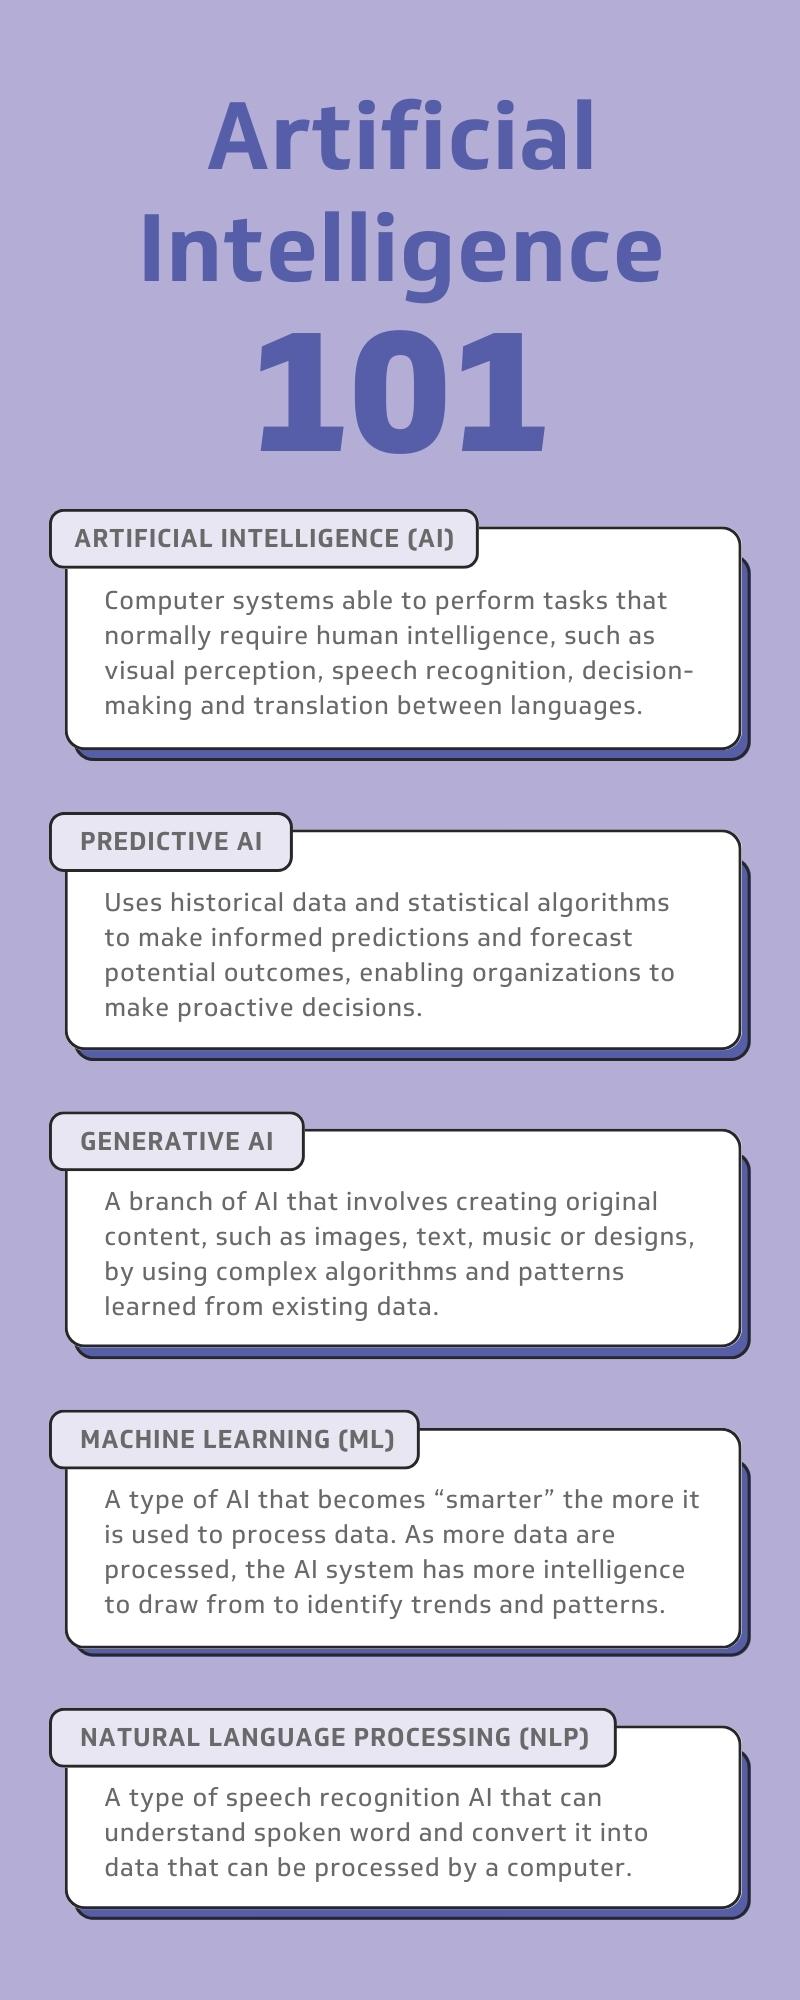 Infographic outlining key AI terms, including predictive AI, generative AI, machine learning and natural language processing.